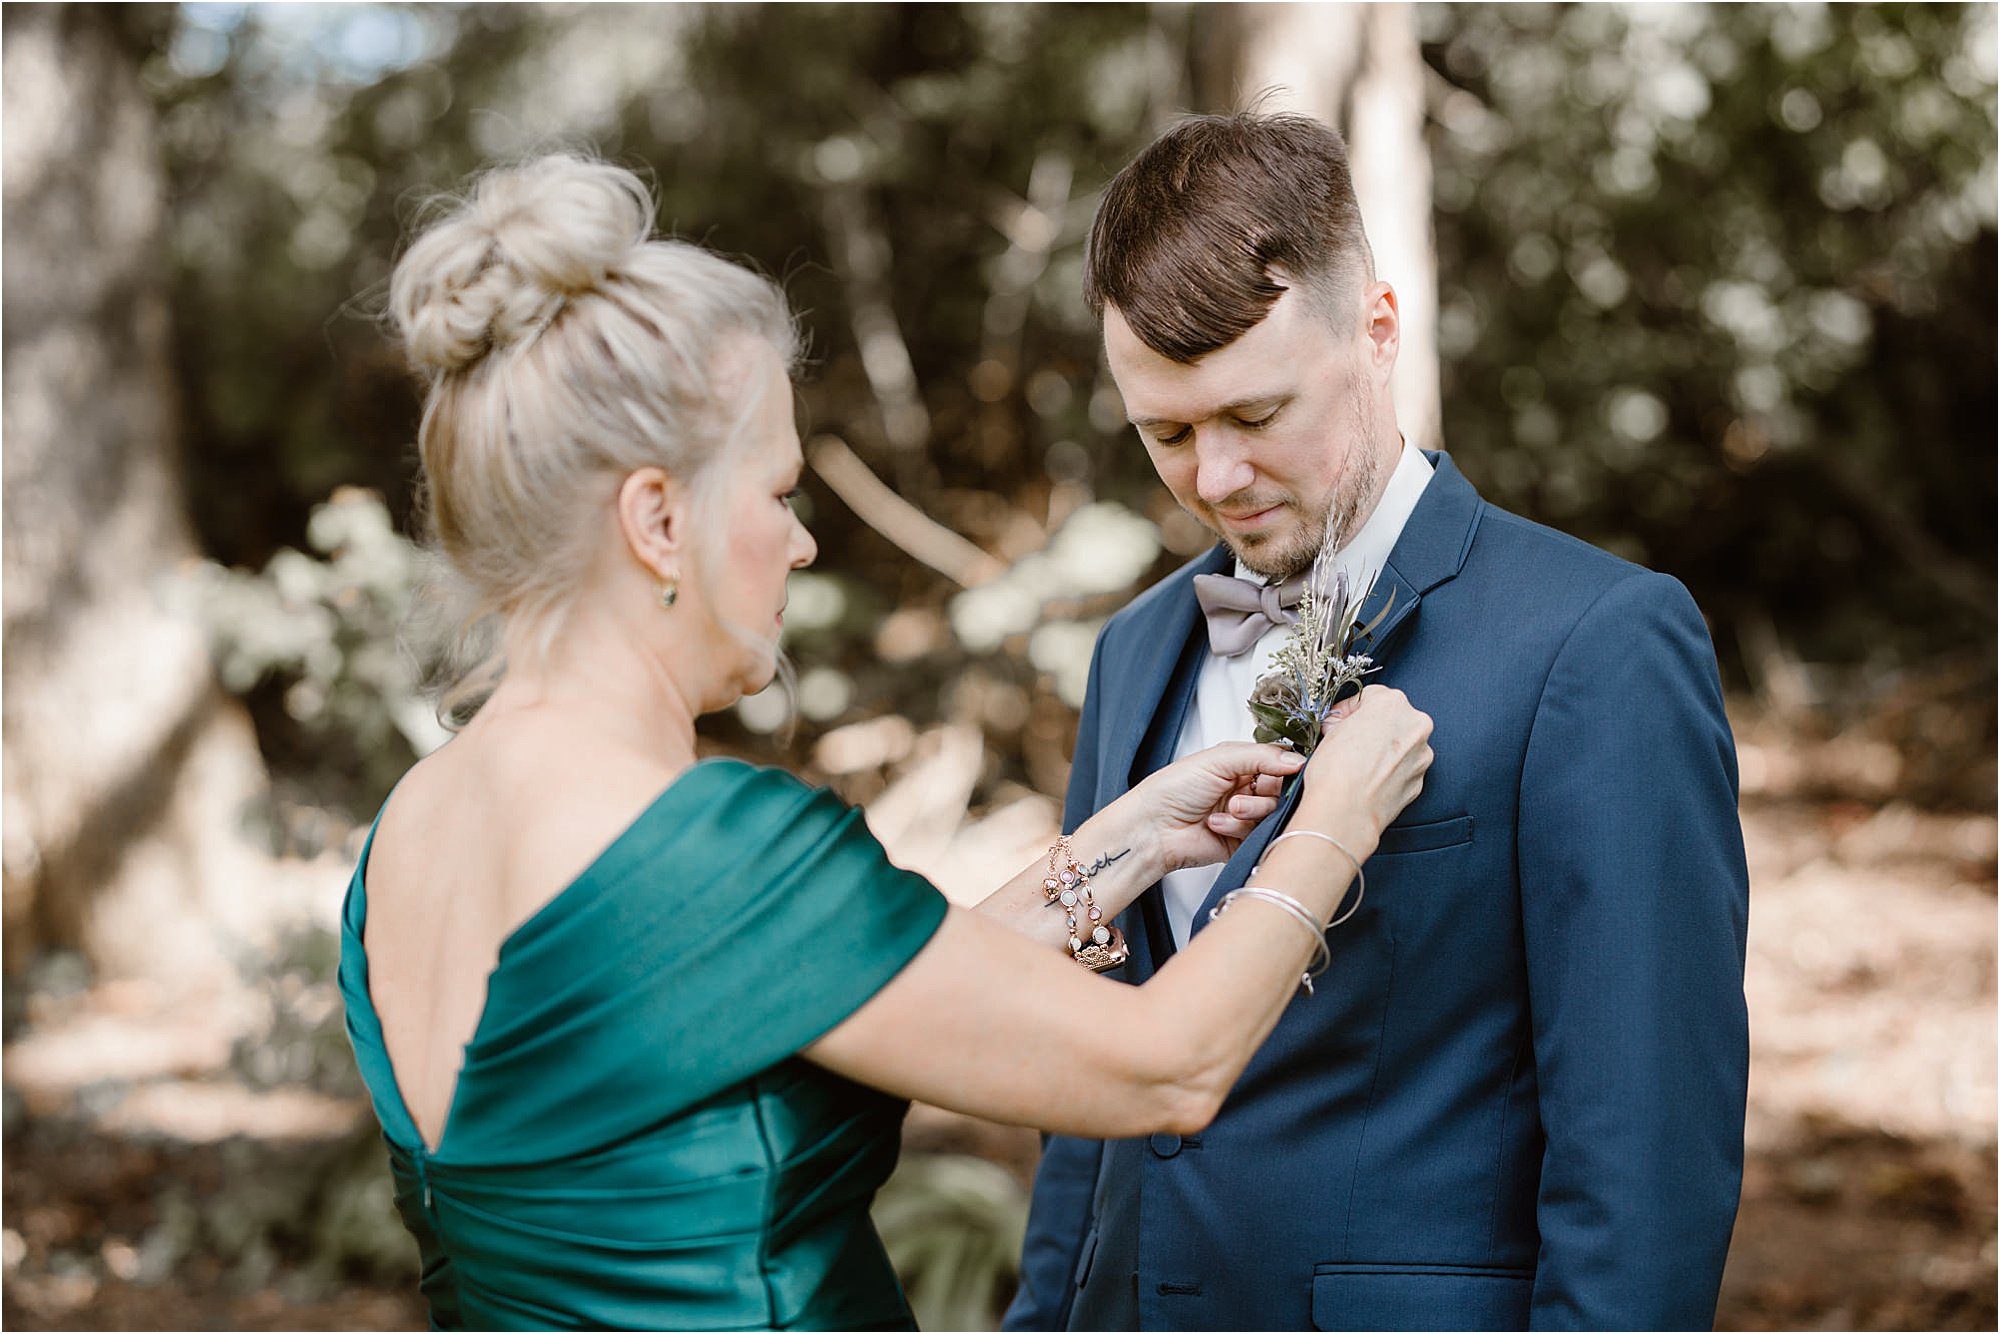 mother of the groom pinning boutonniere